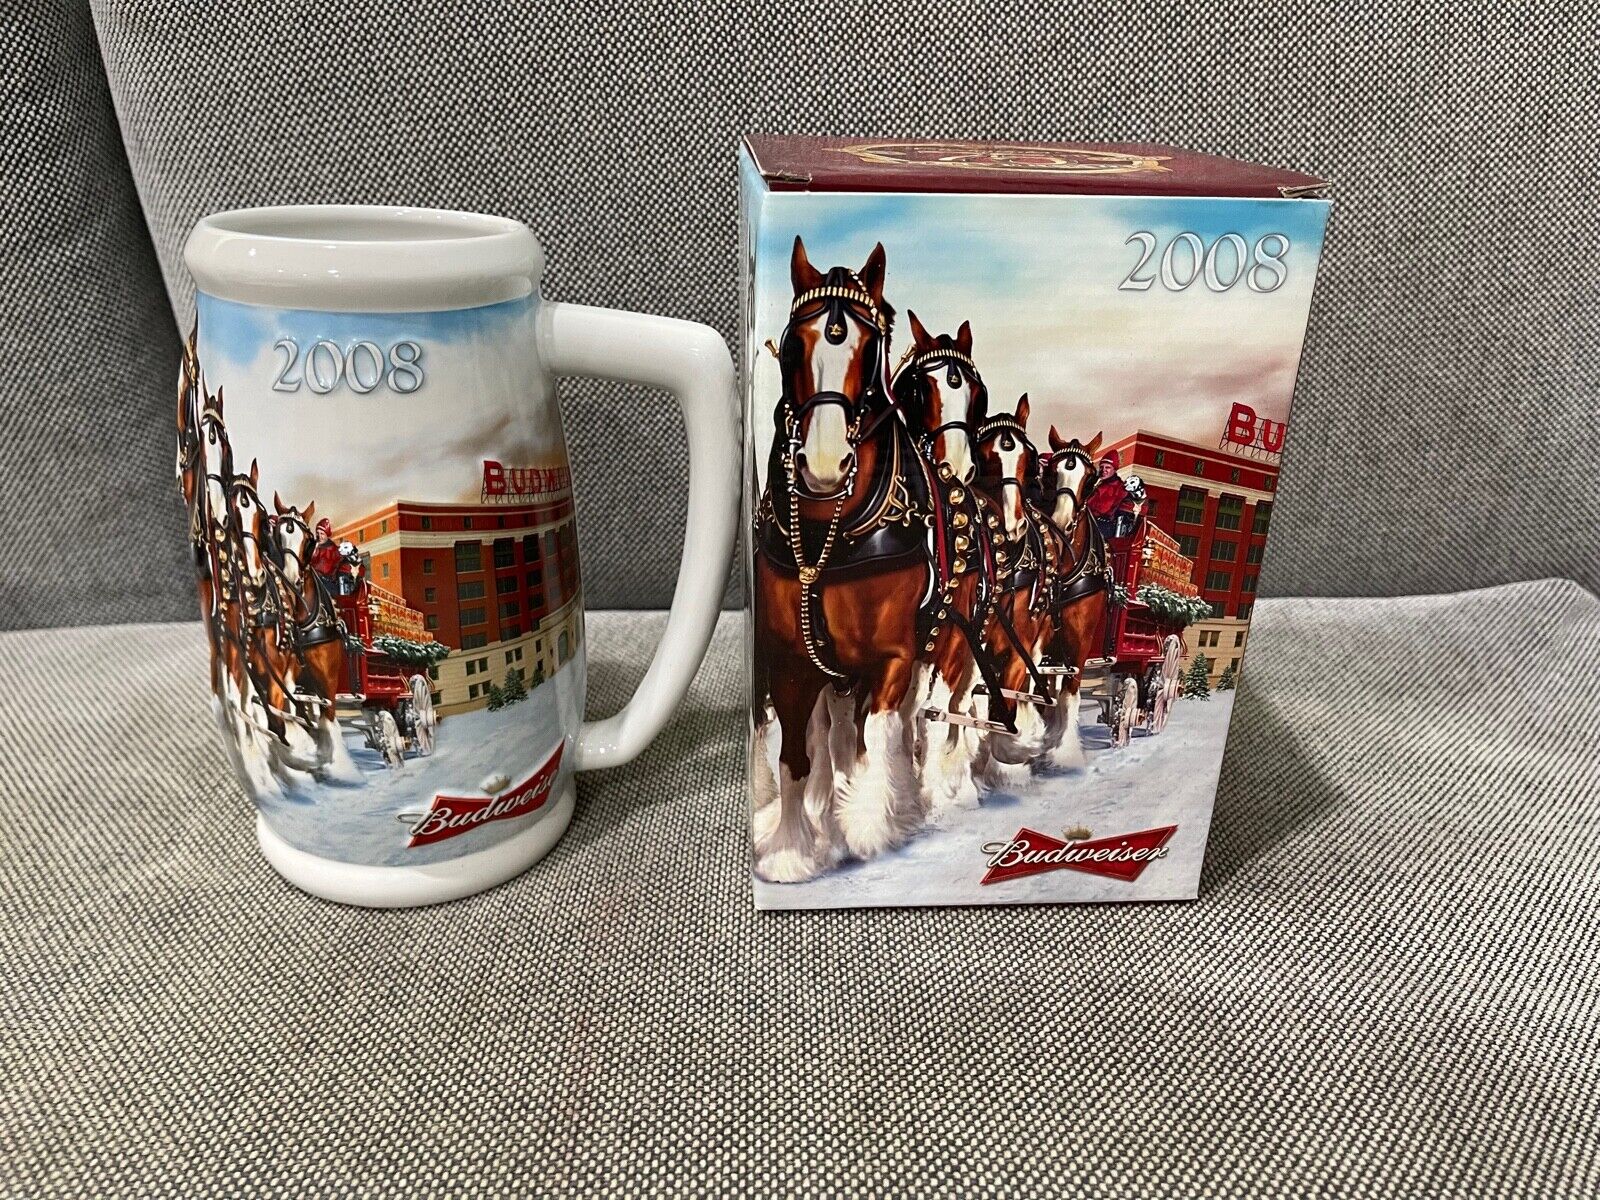 2008 Anheuser Busch Beer Stein Clydesdales 75 Years of Proud Tradition w/ Box